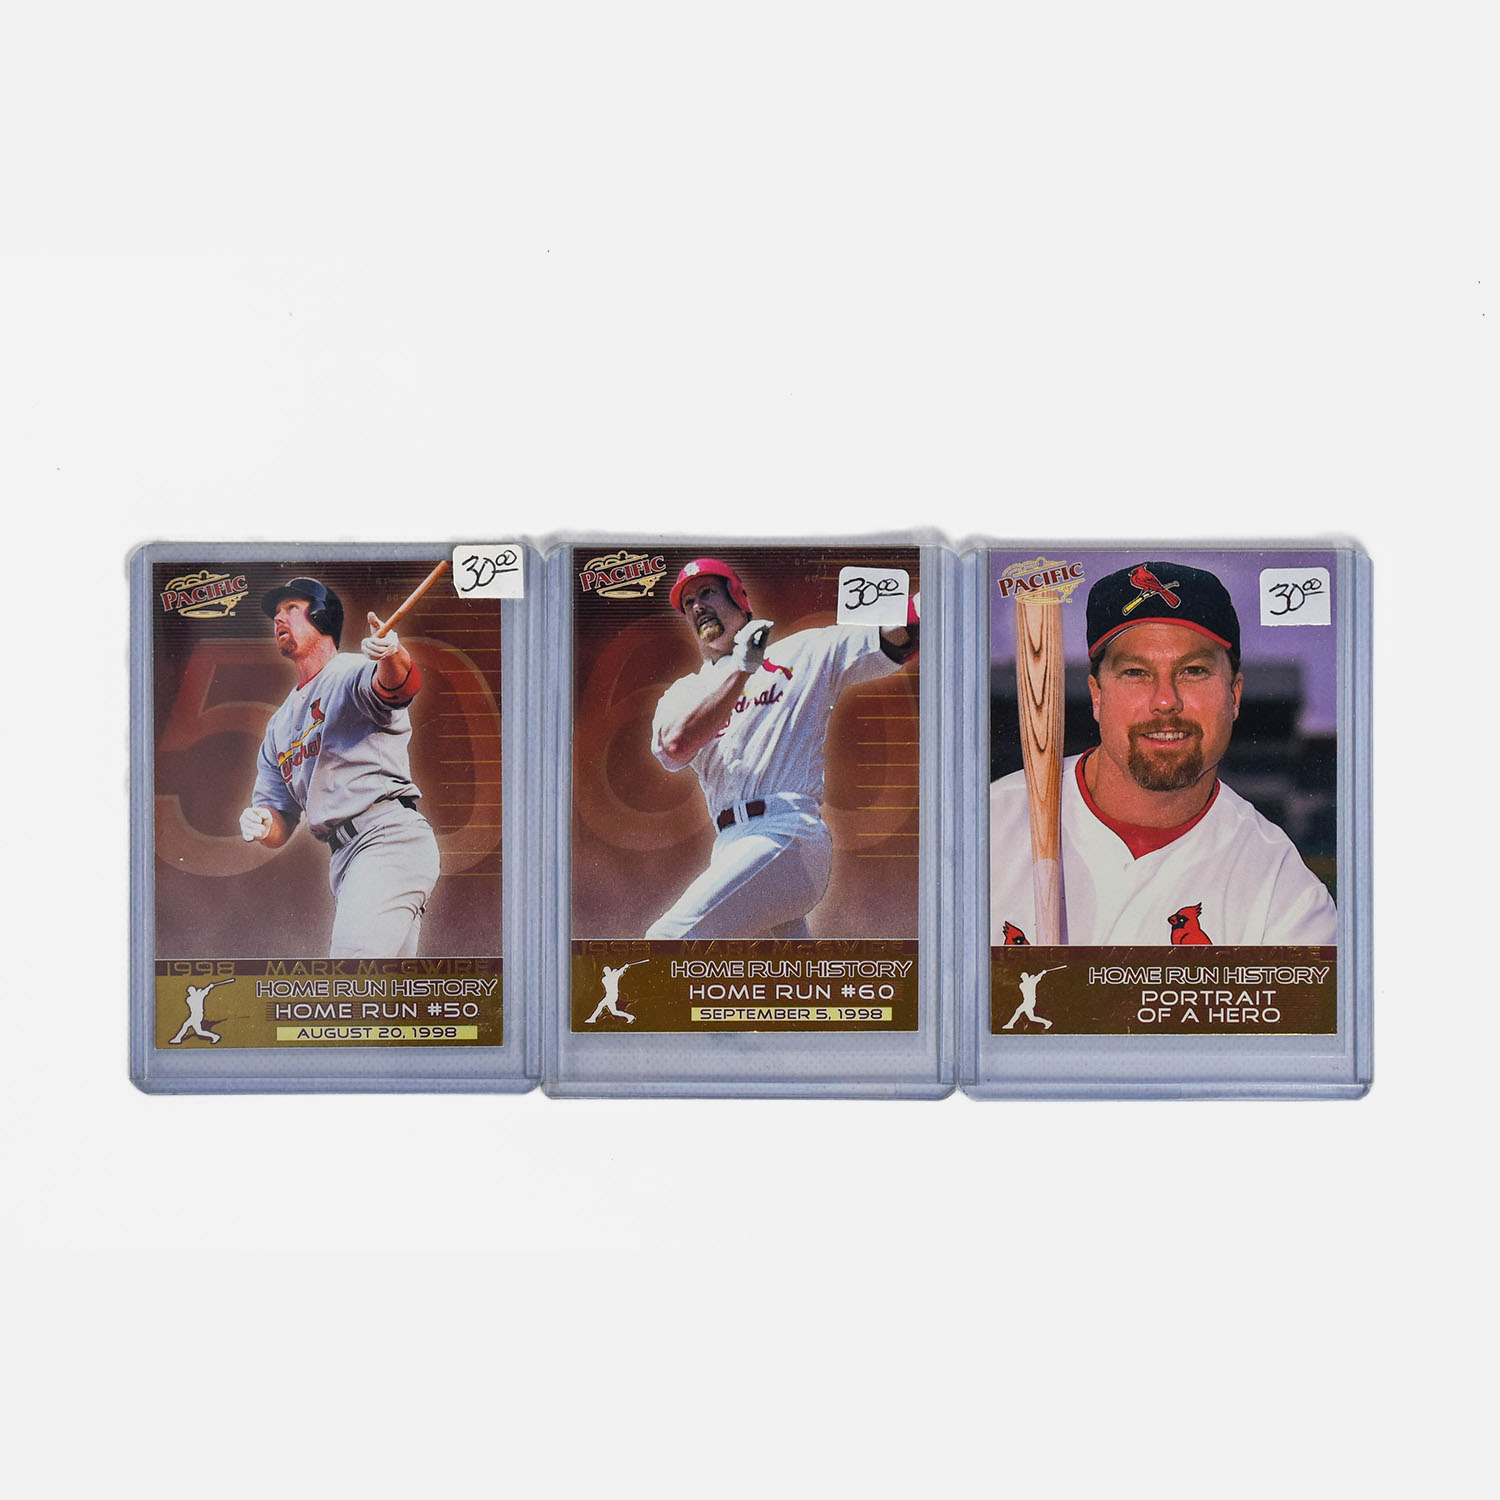 3 Mark McGwire MLB Home Run Commemorative Baseball Cards with Extra 750 Plus Mint Cards